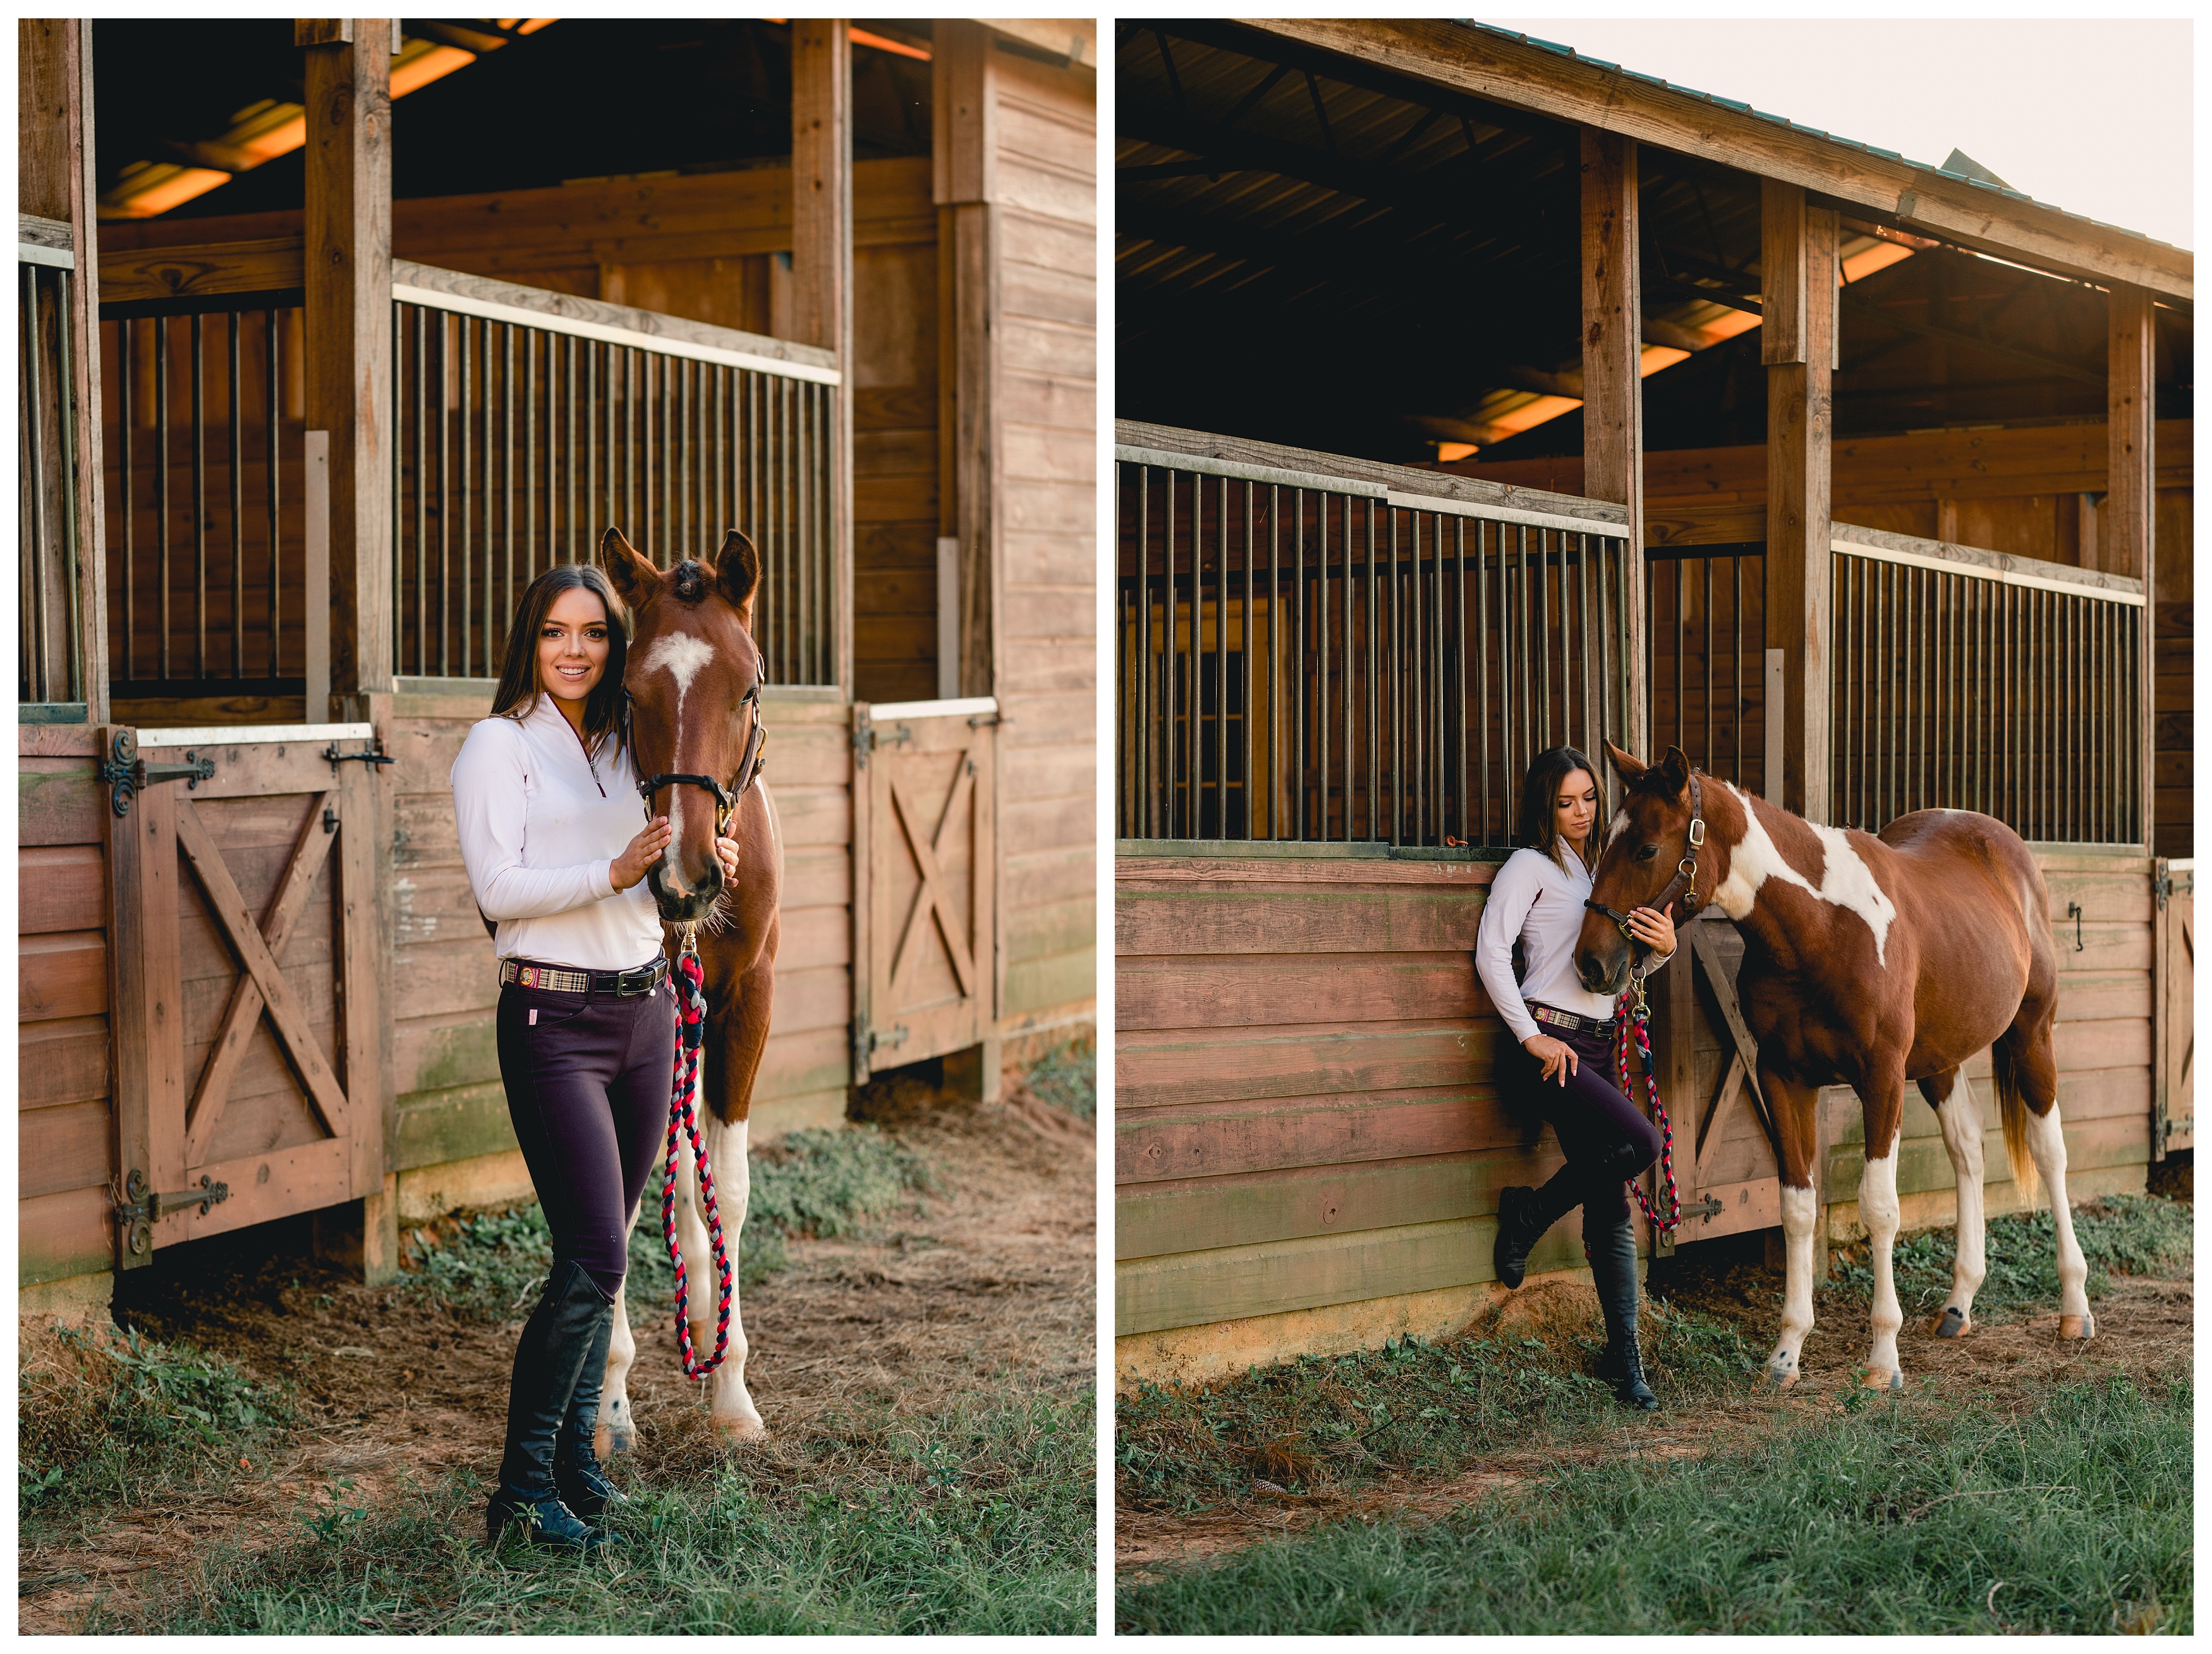 Equine portrait session using the barn. Shelly Williams Photography